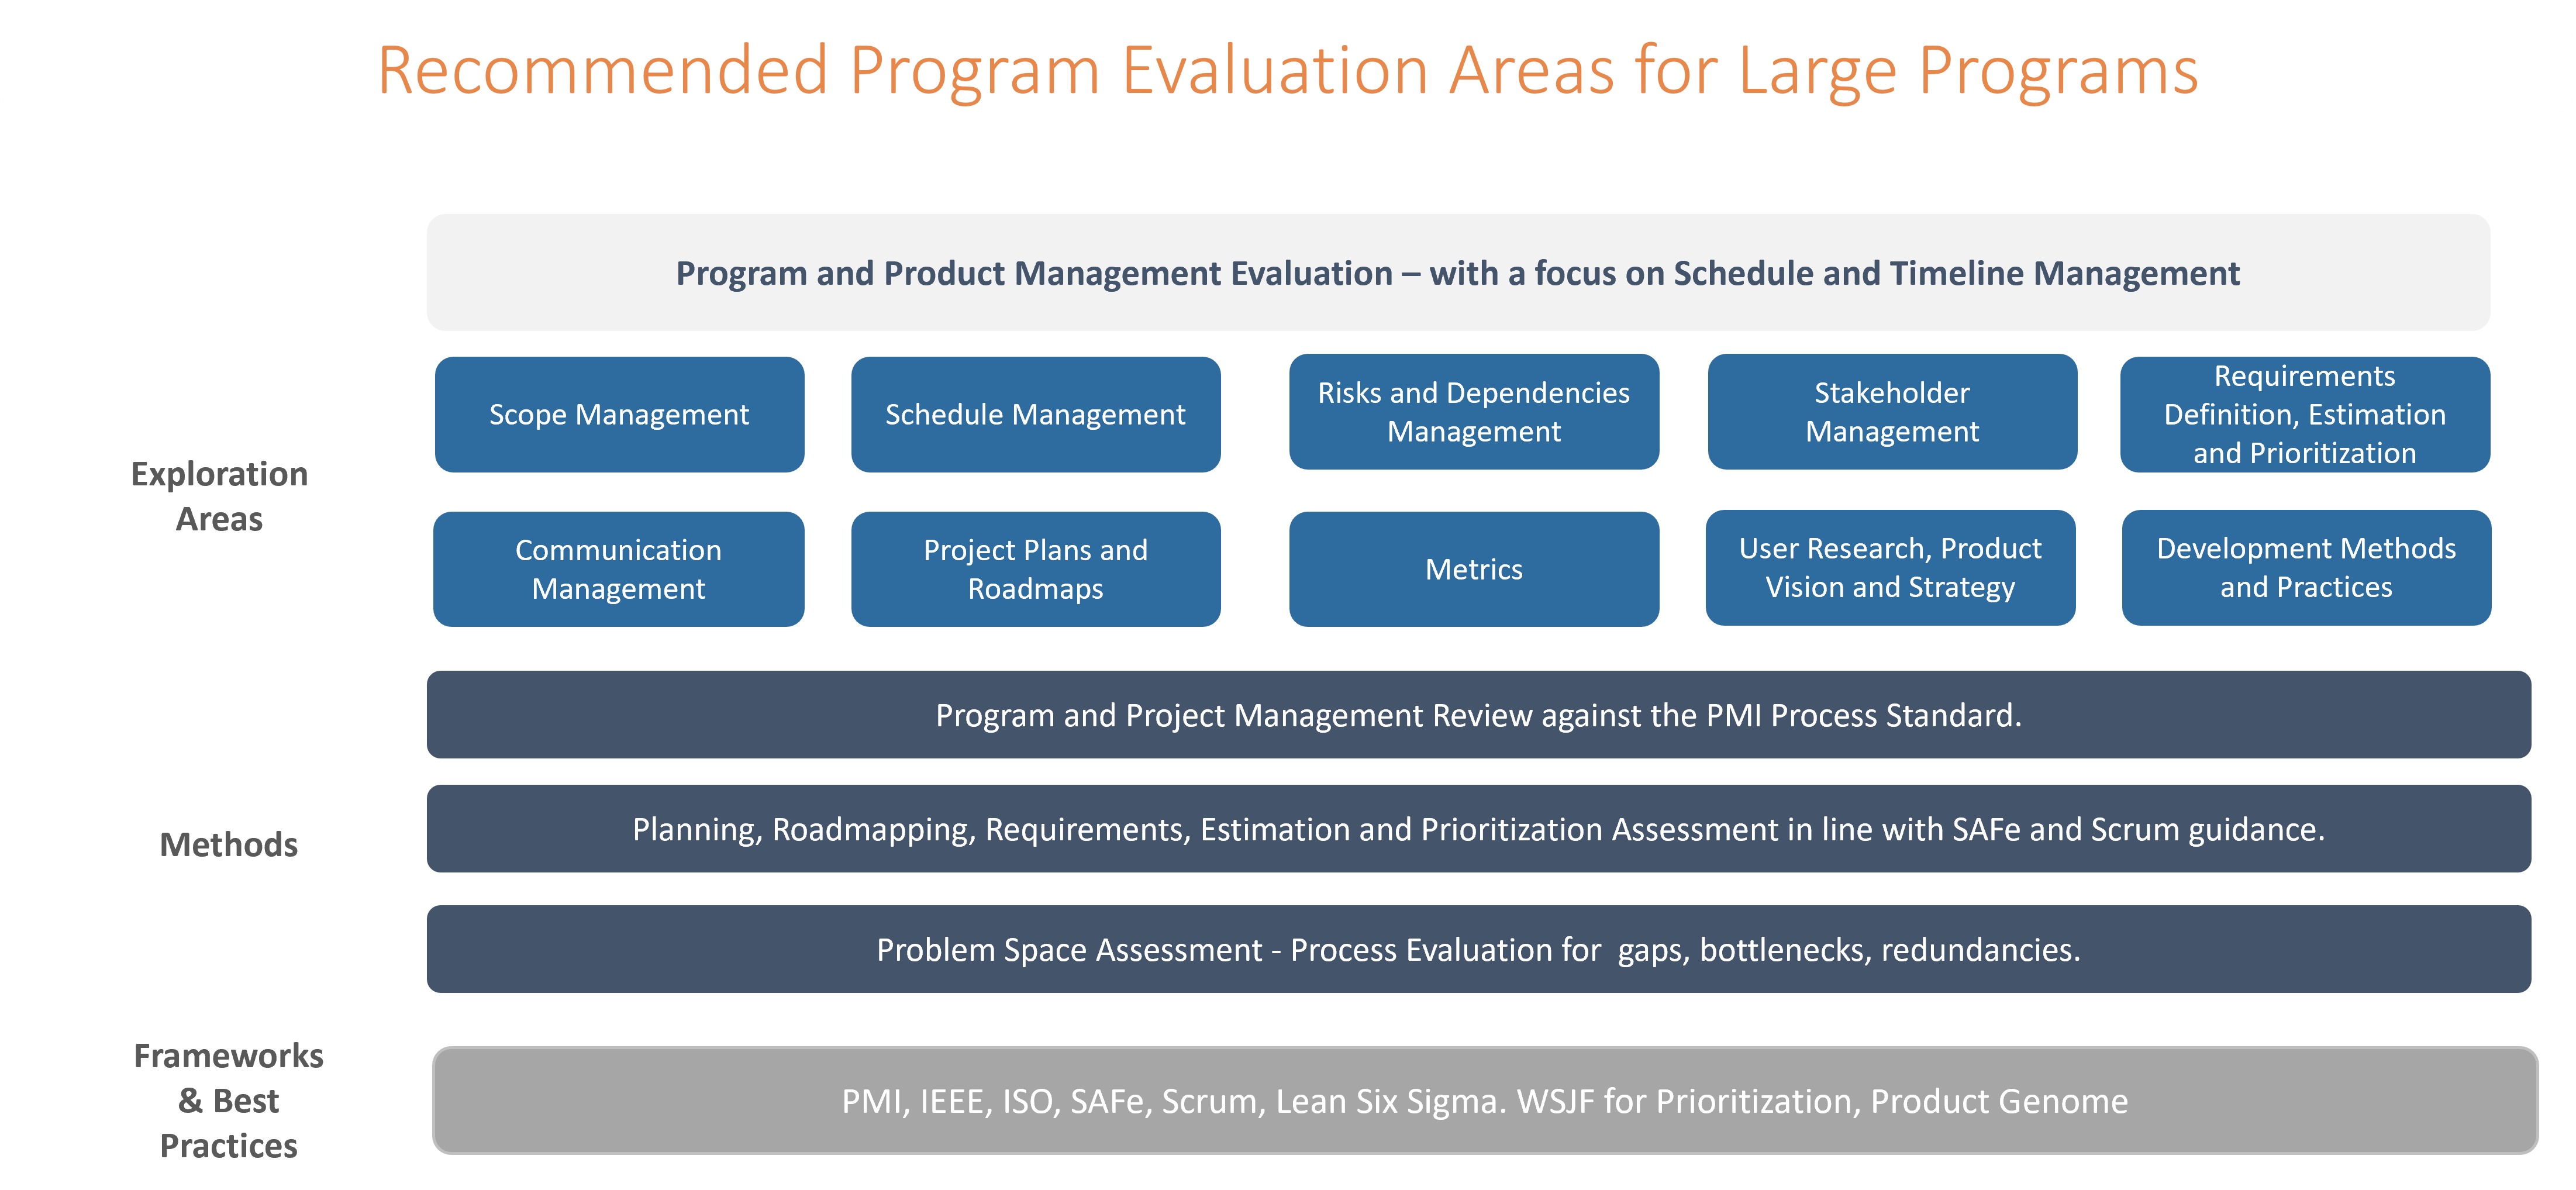 Recommended Program Evaluation Areas for Large Programs